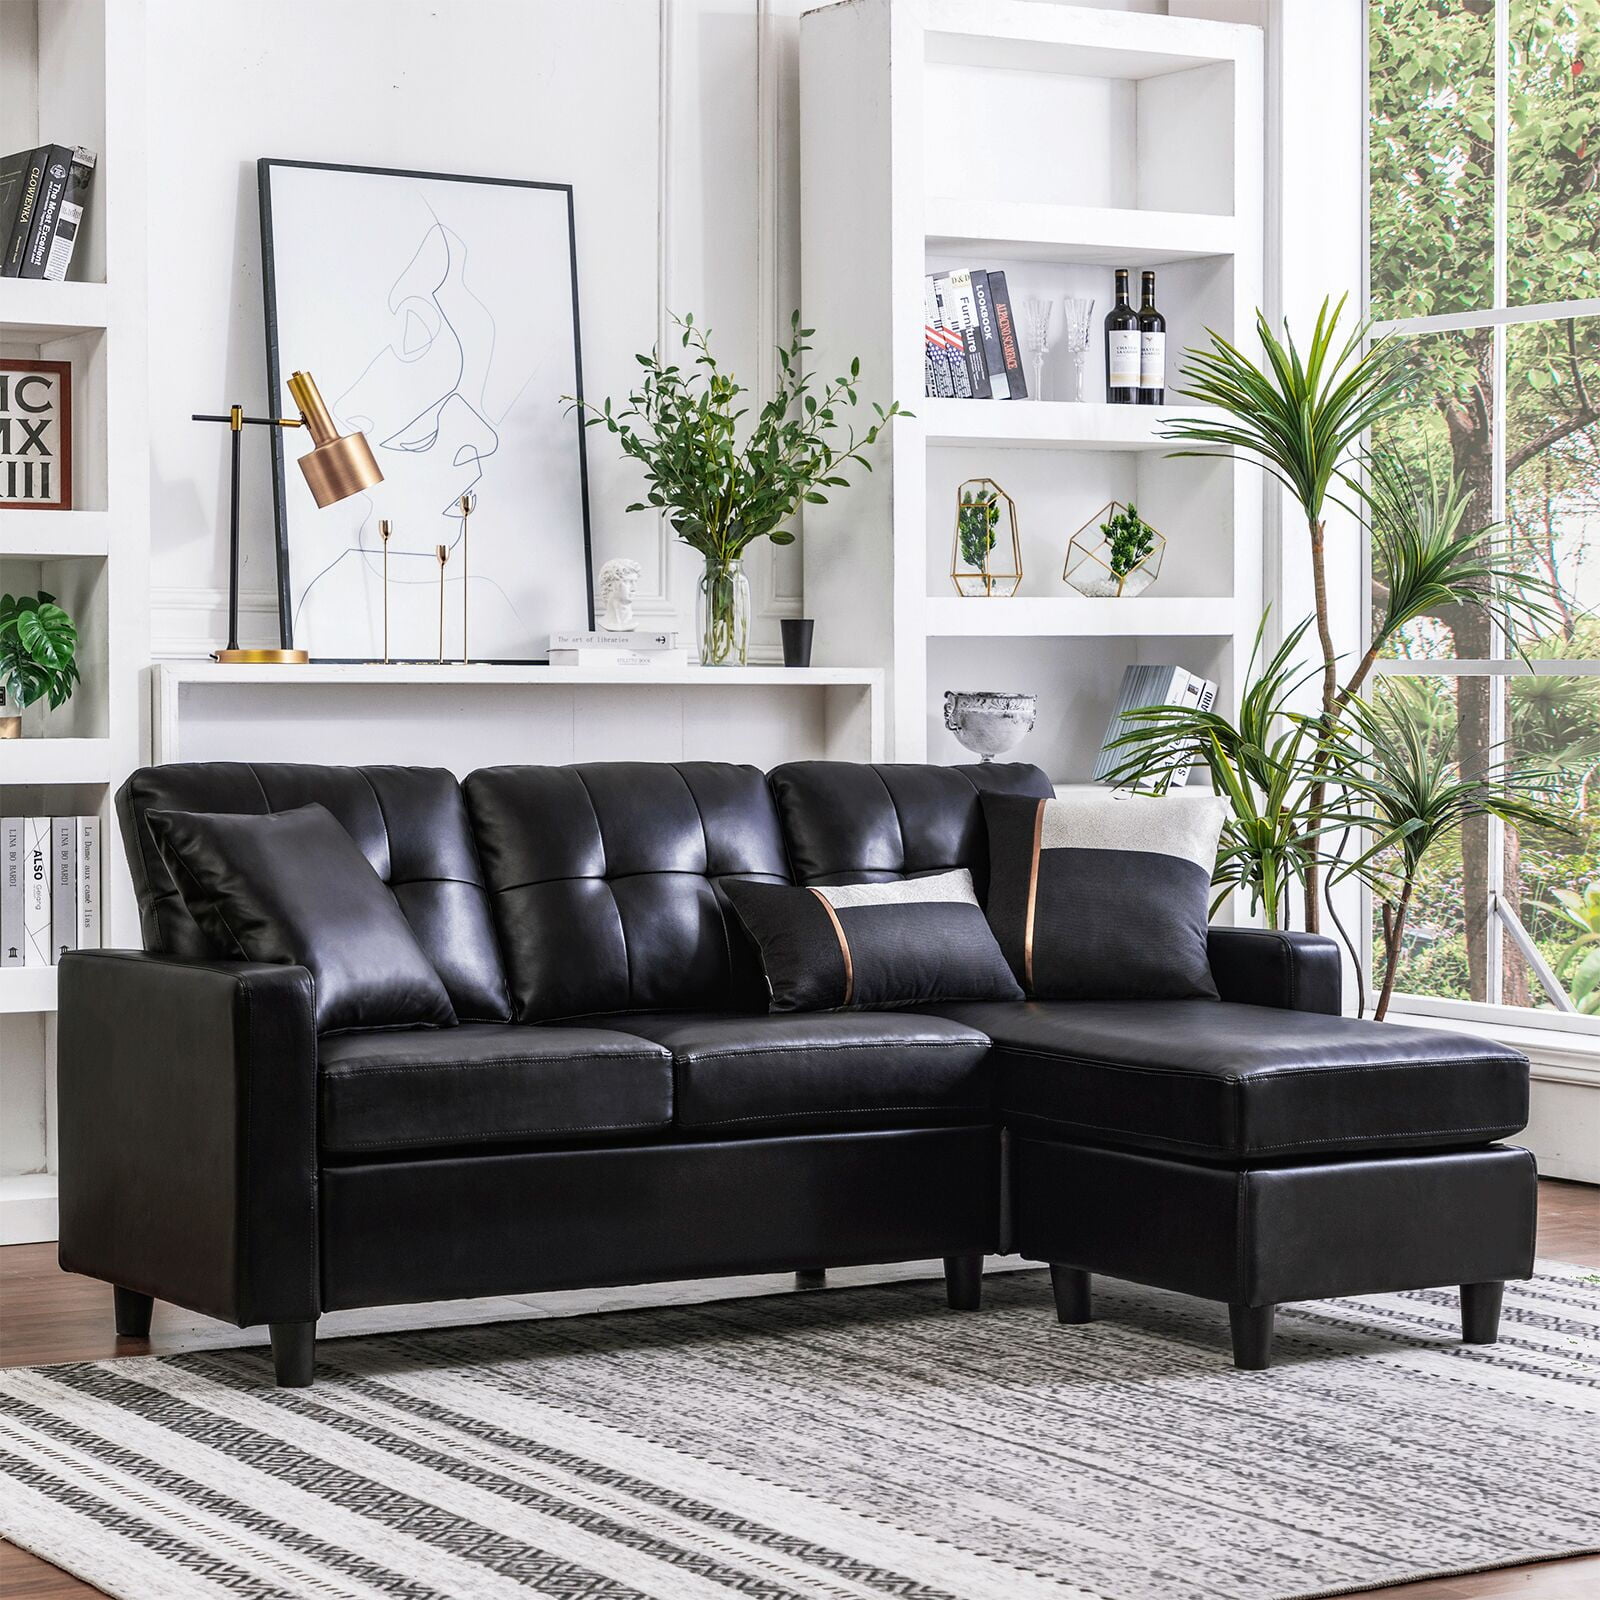 Honbay Faux Leather Sectional Sofa L, Black Leather Sectionals